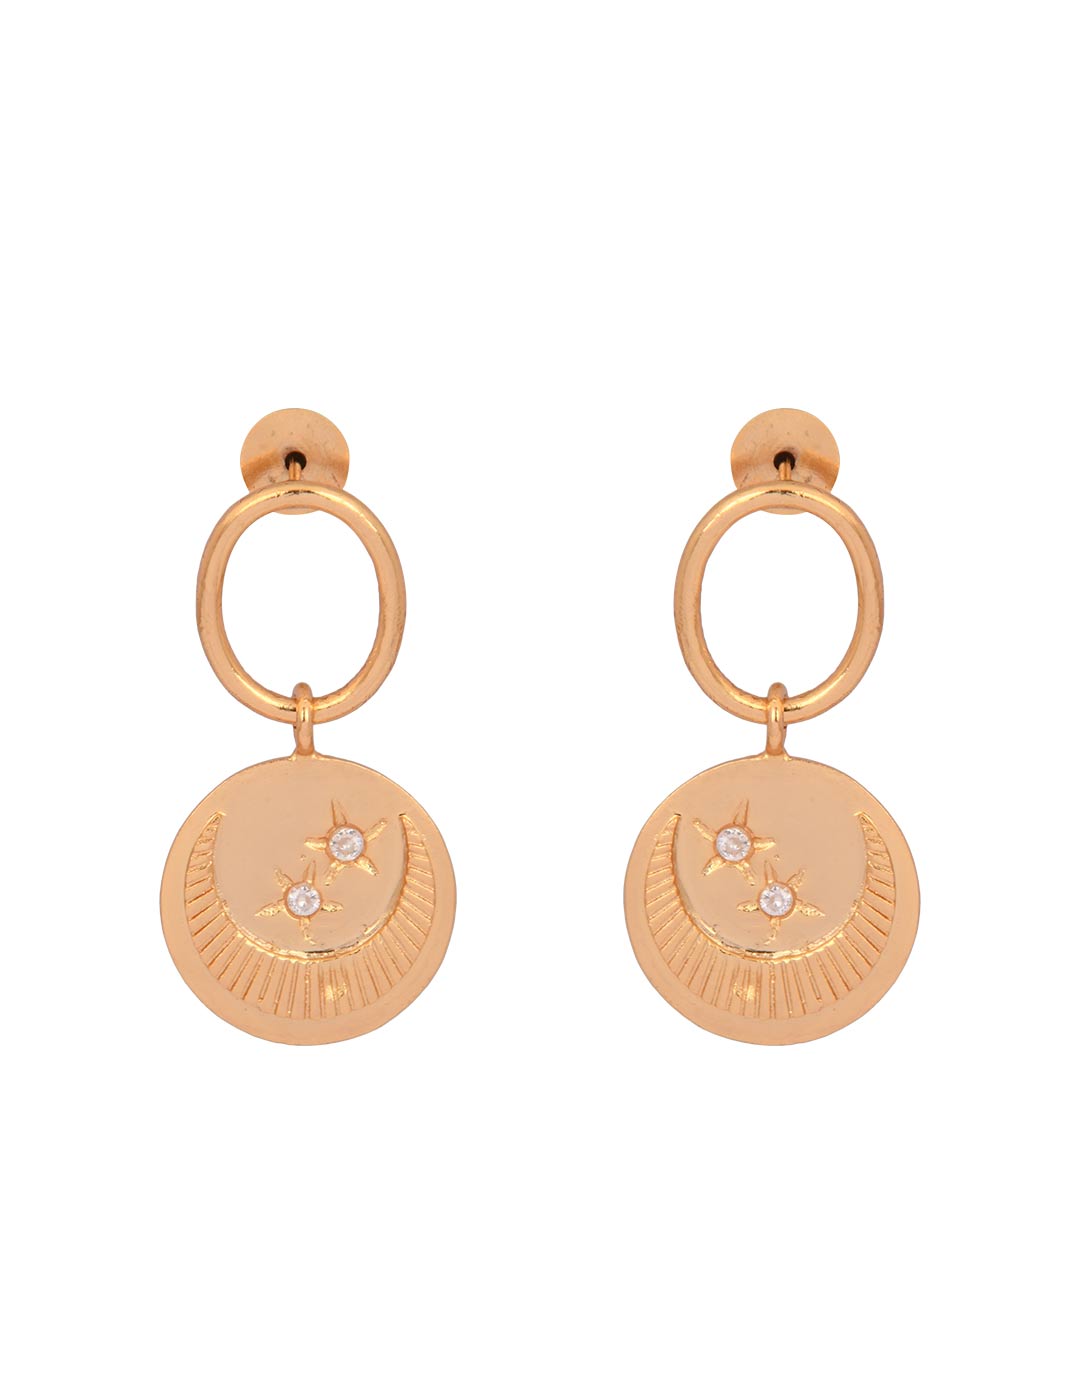 Chaand Earrings | Handmade | 24K Gold Plated | Made in India